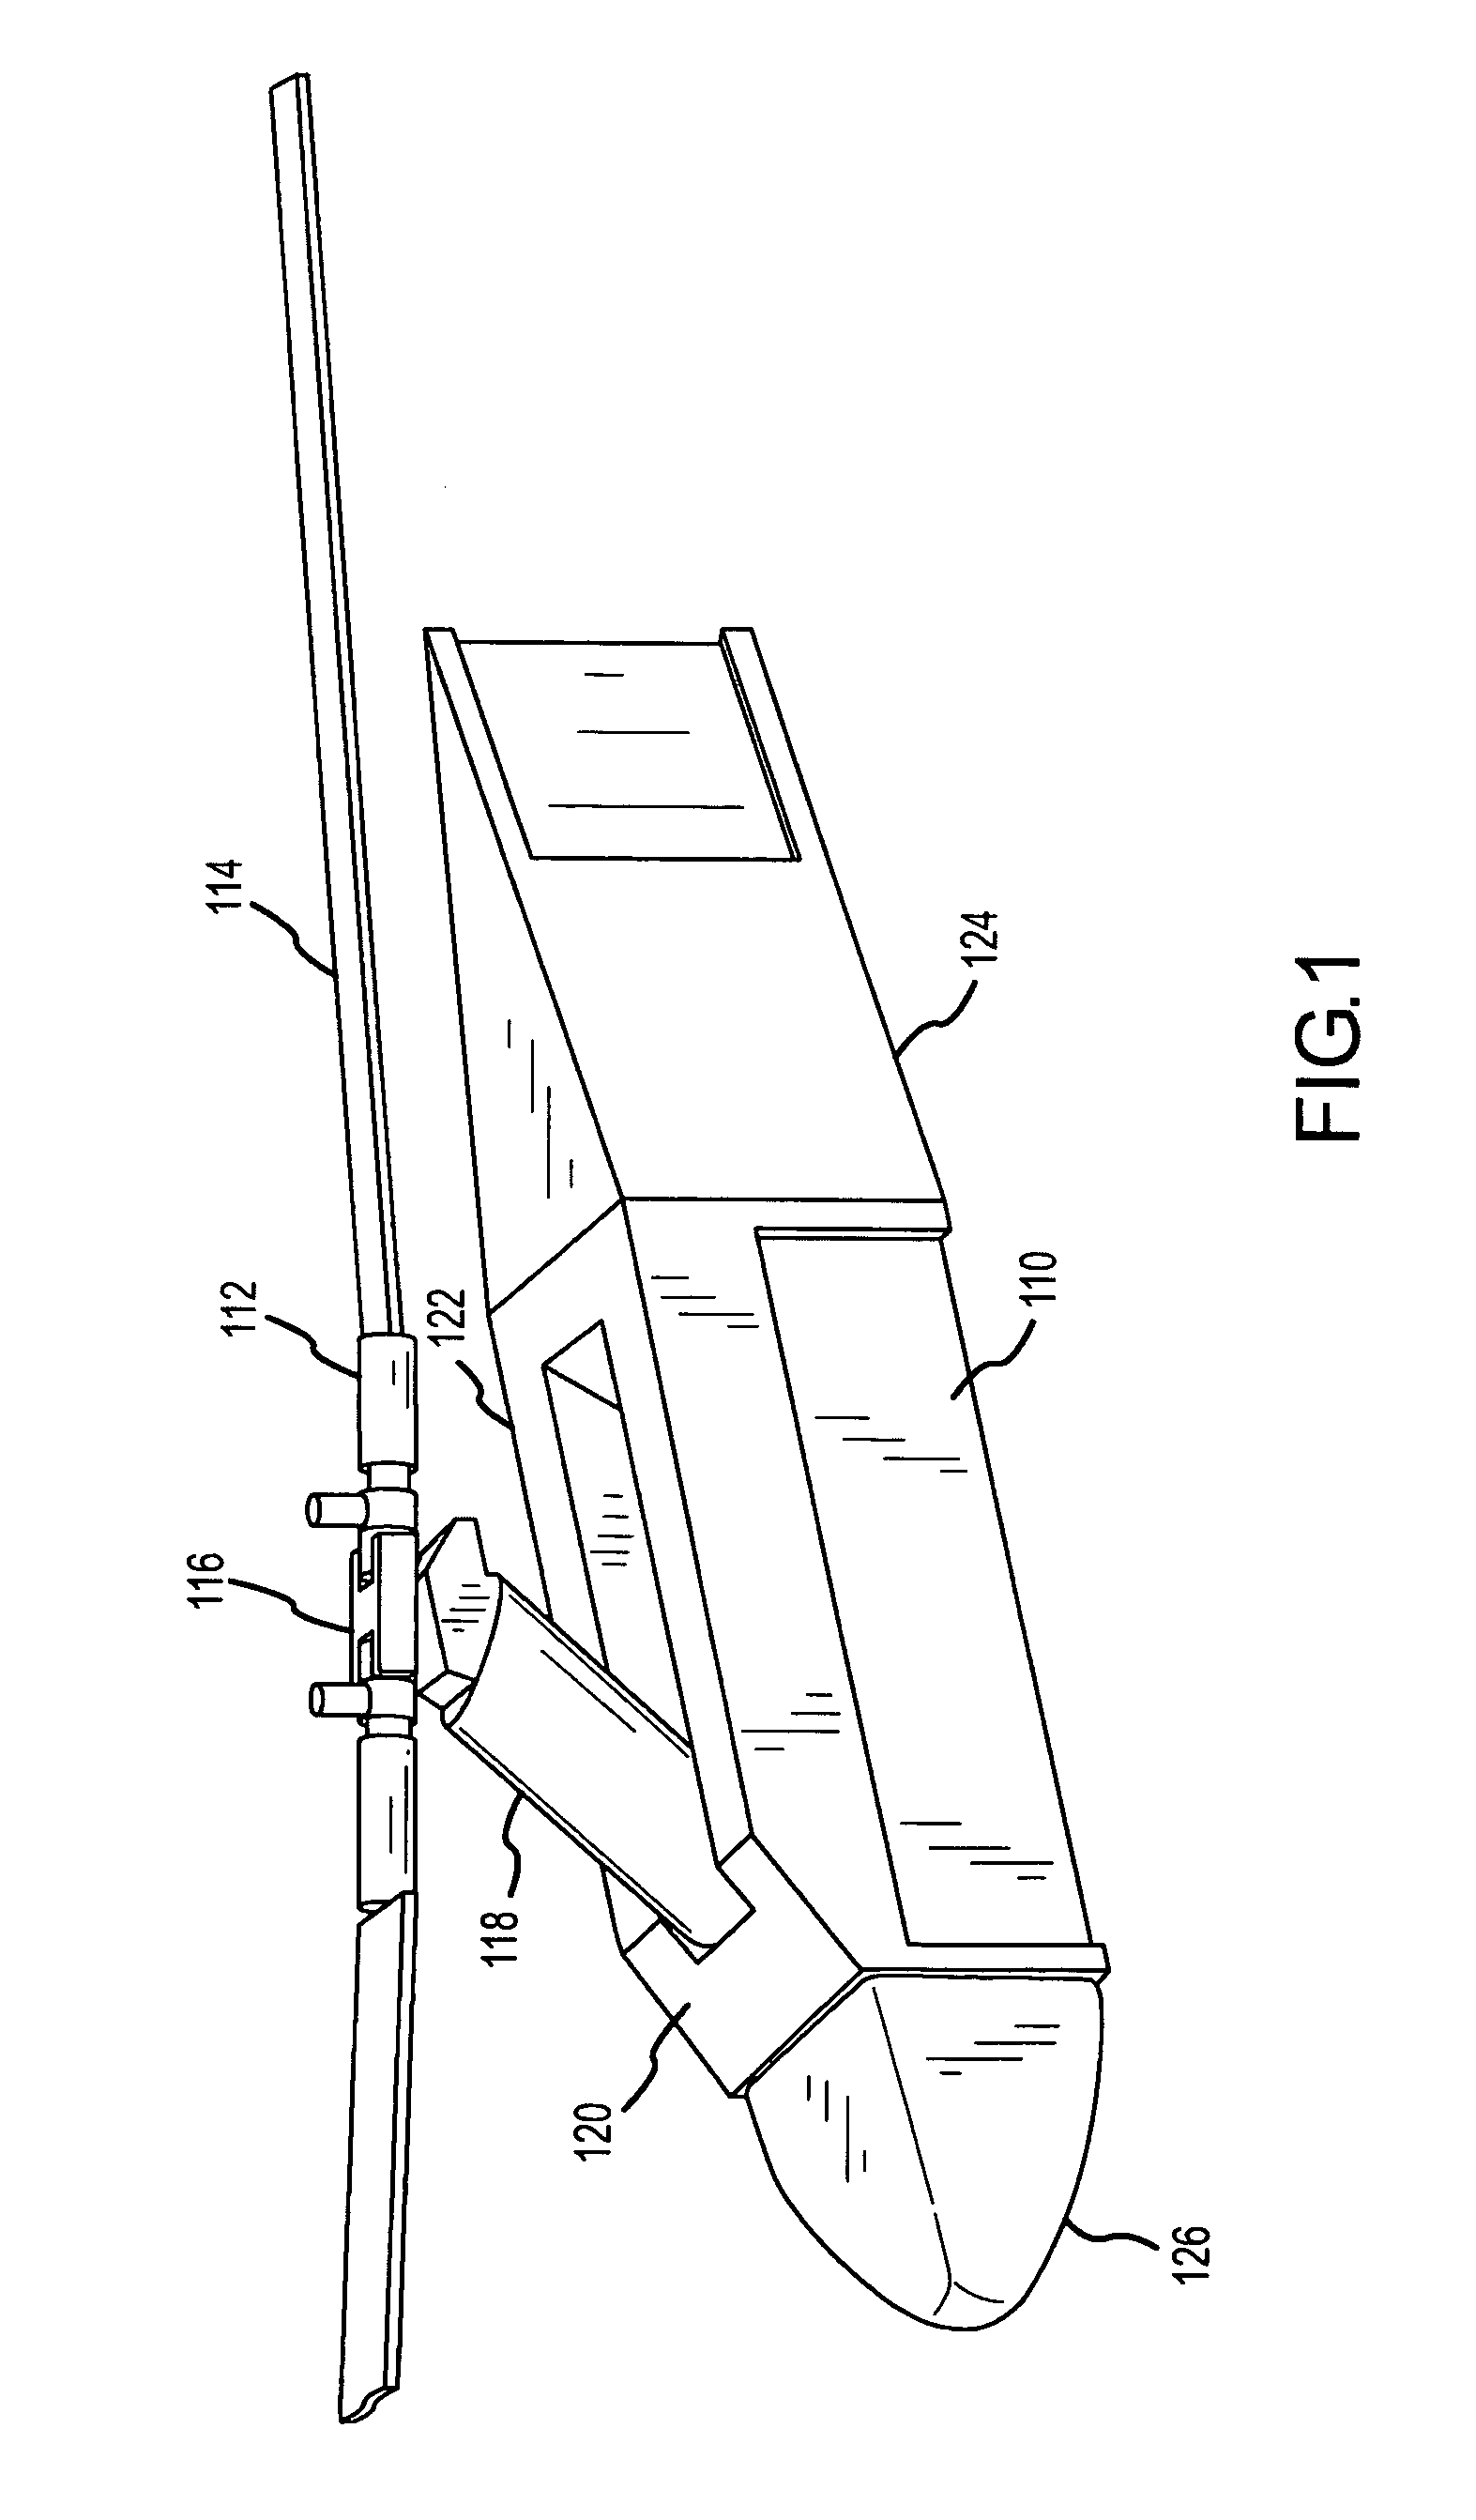 Methods and apparatus for airborne systems